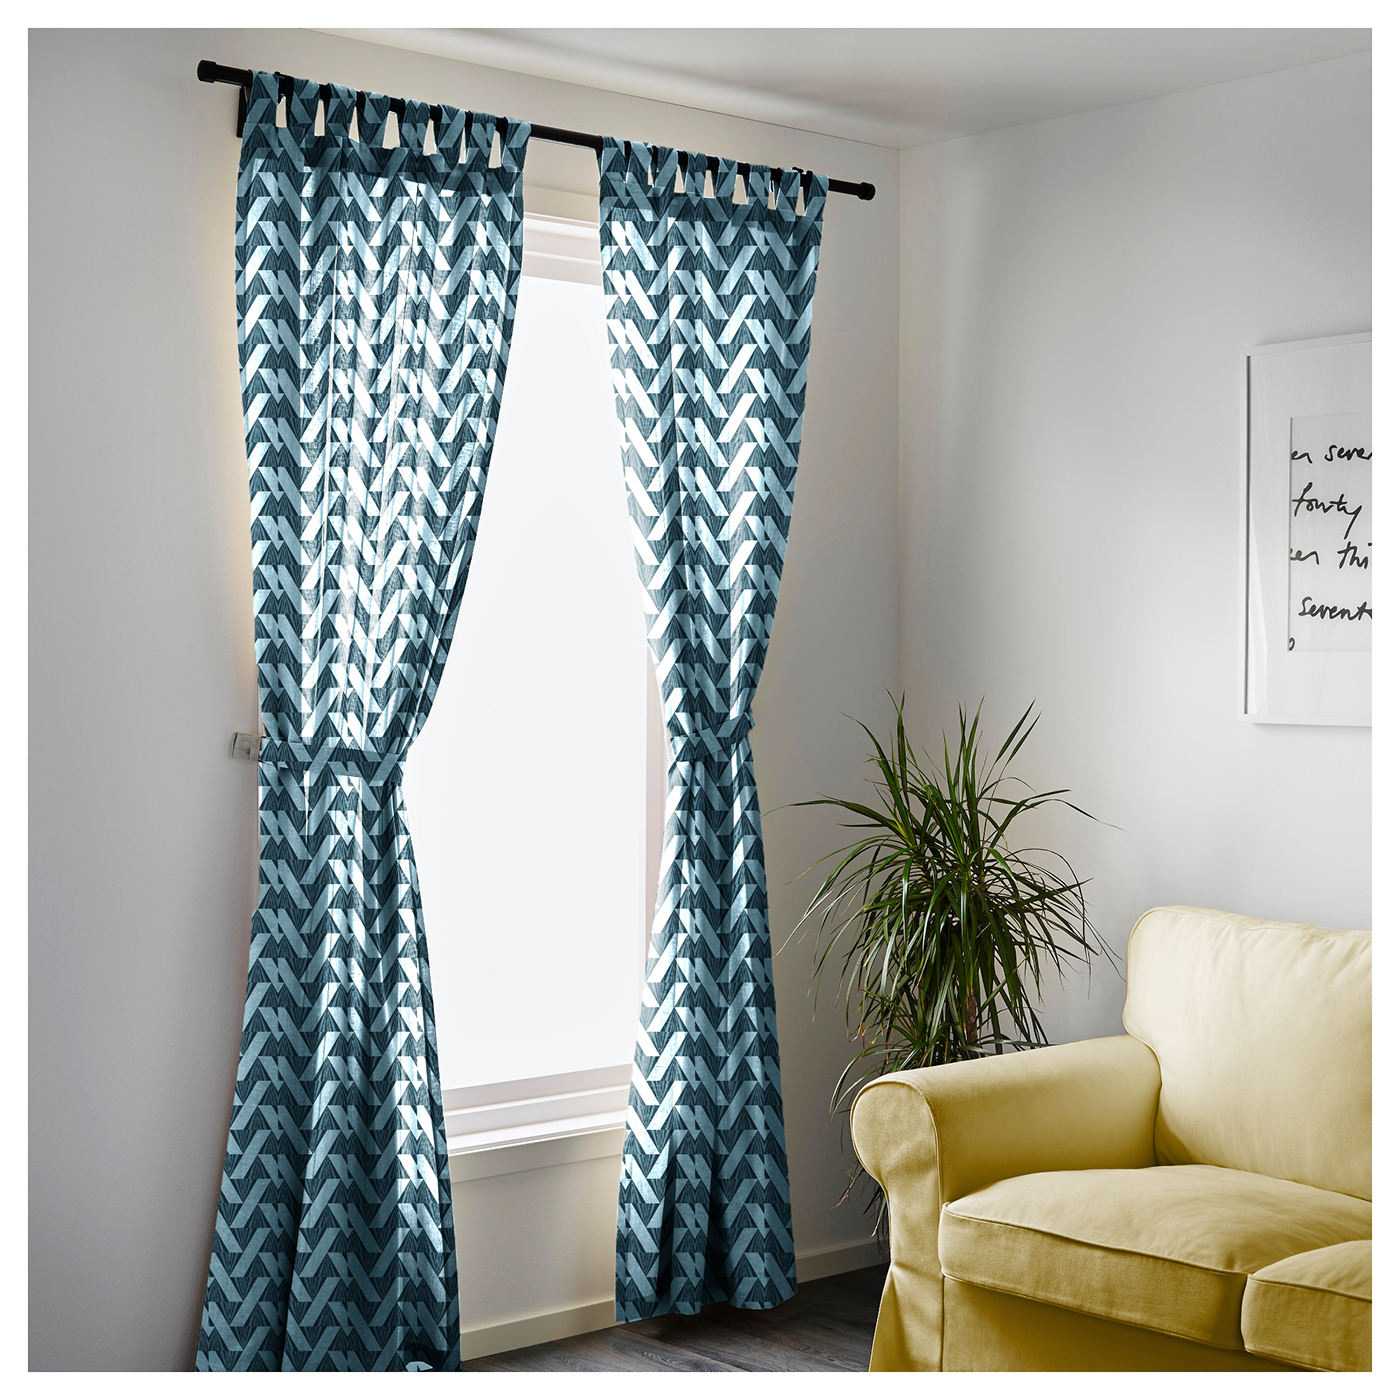 futuristic photochromic elements of Nature curtains interiors Technology